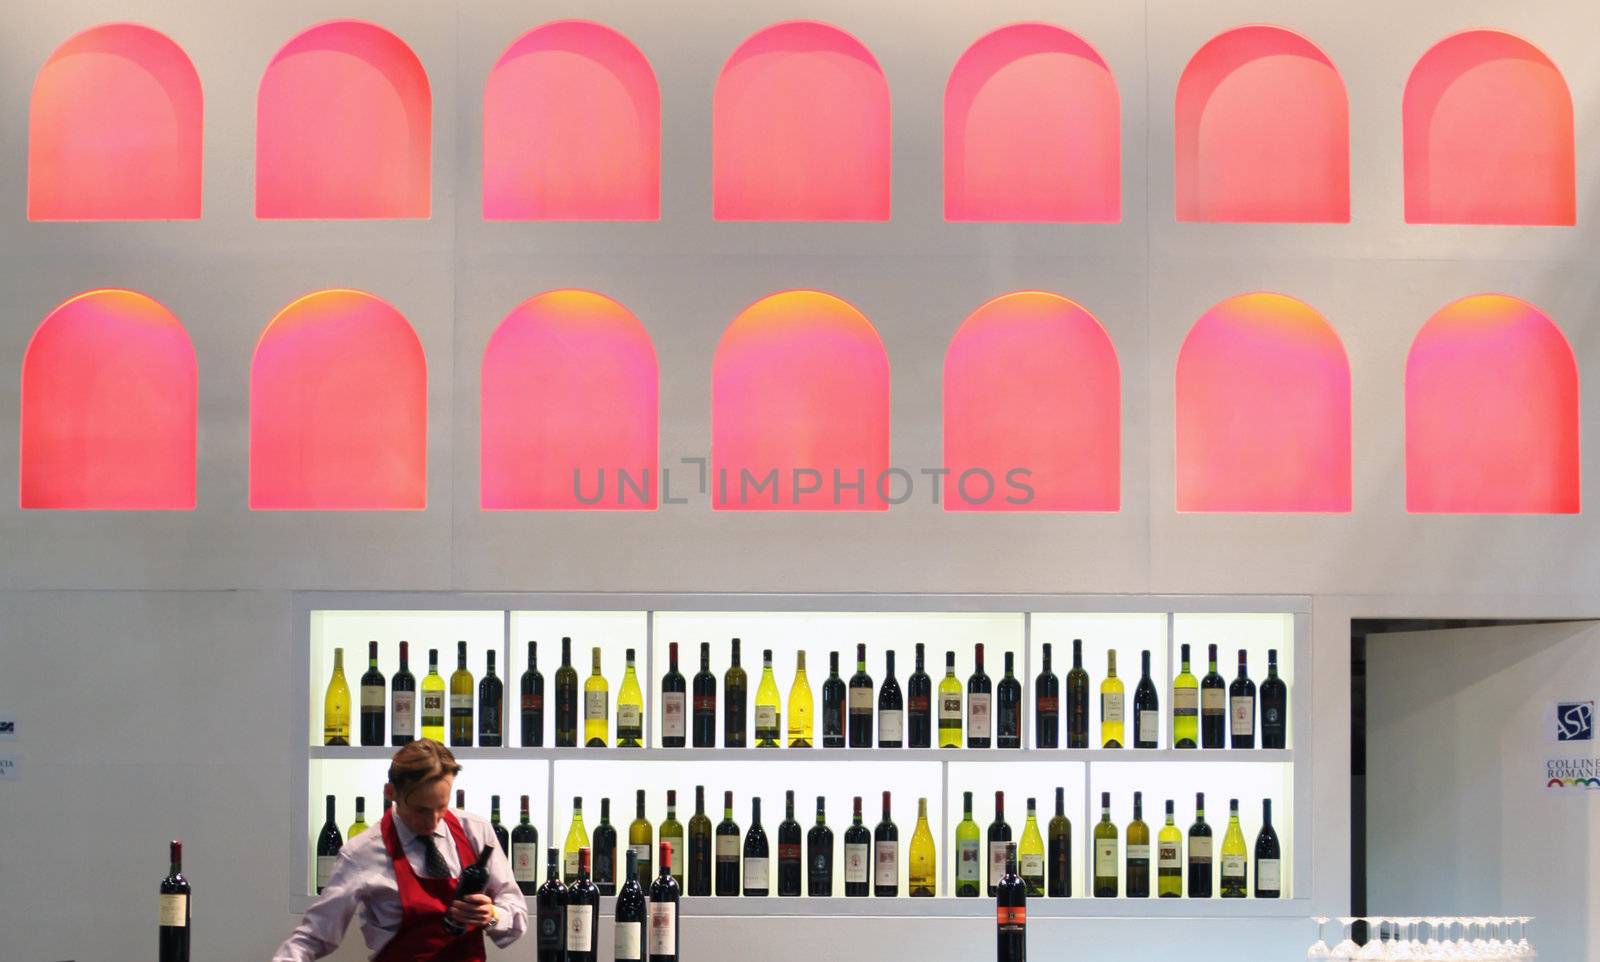 Italian wines tasting area at at BIT, International Tourism Exchange Exhibition in Milan, Italy.